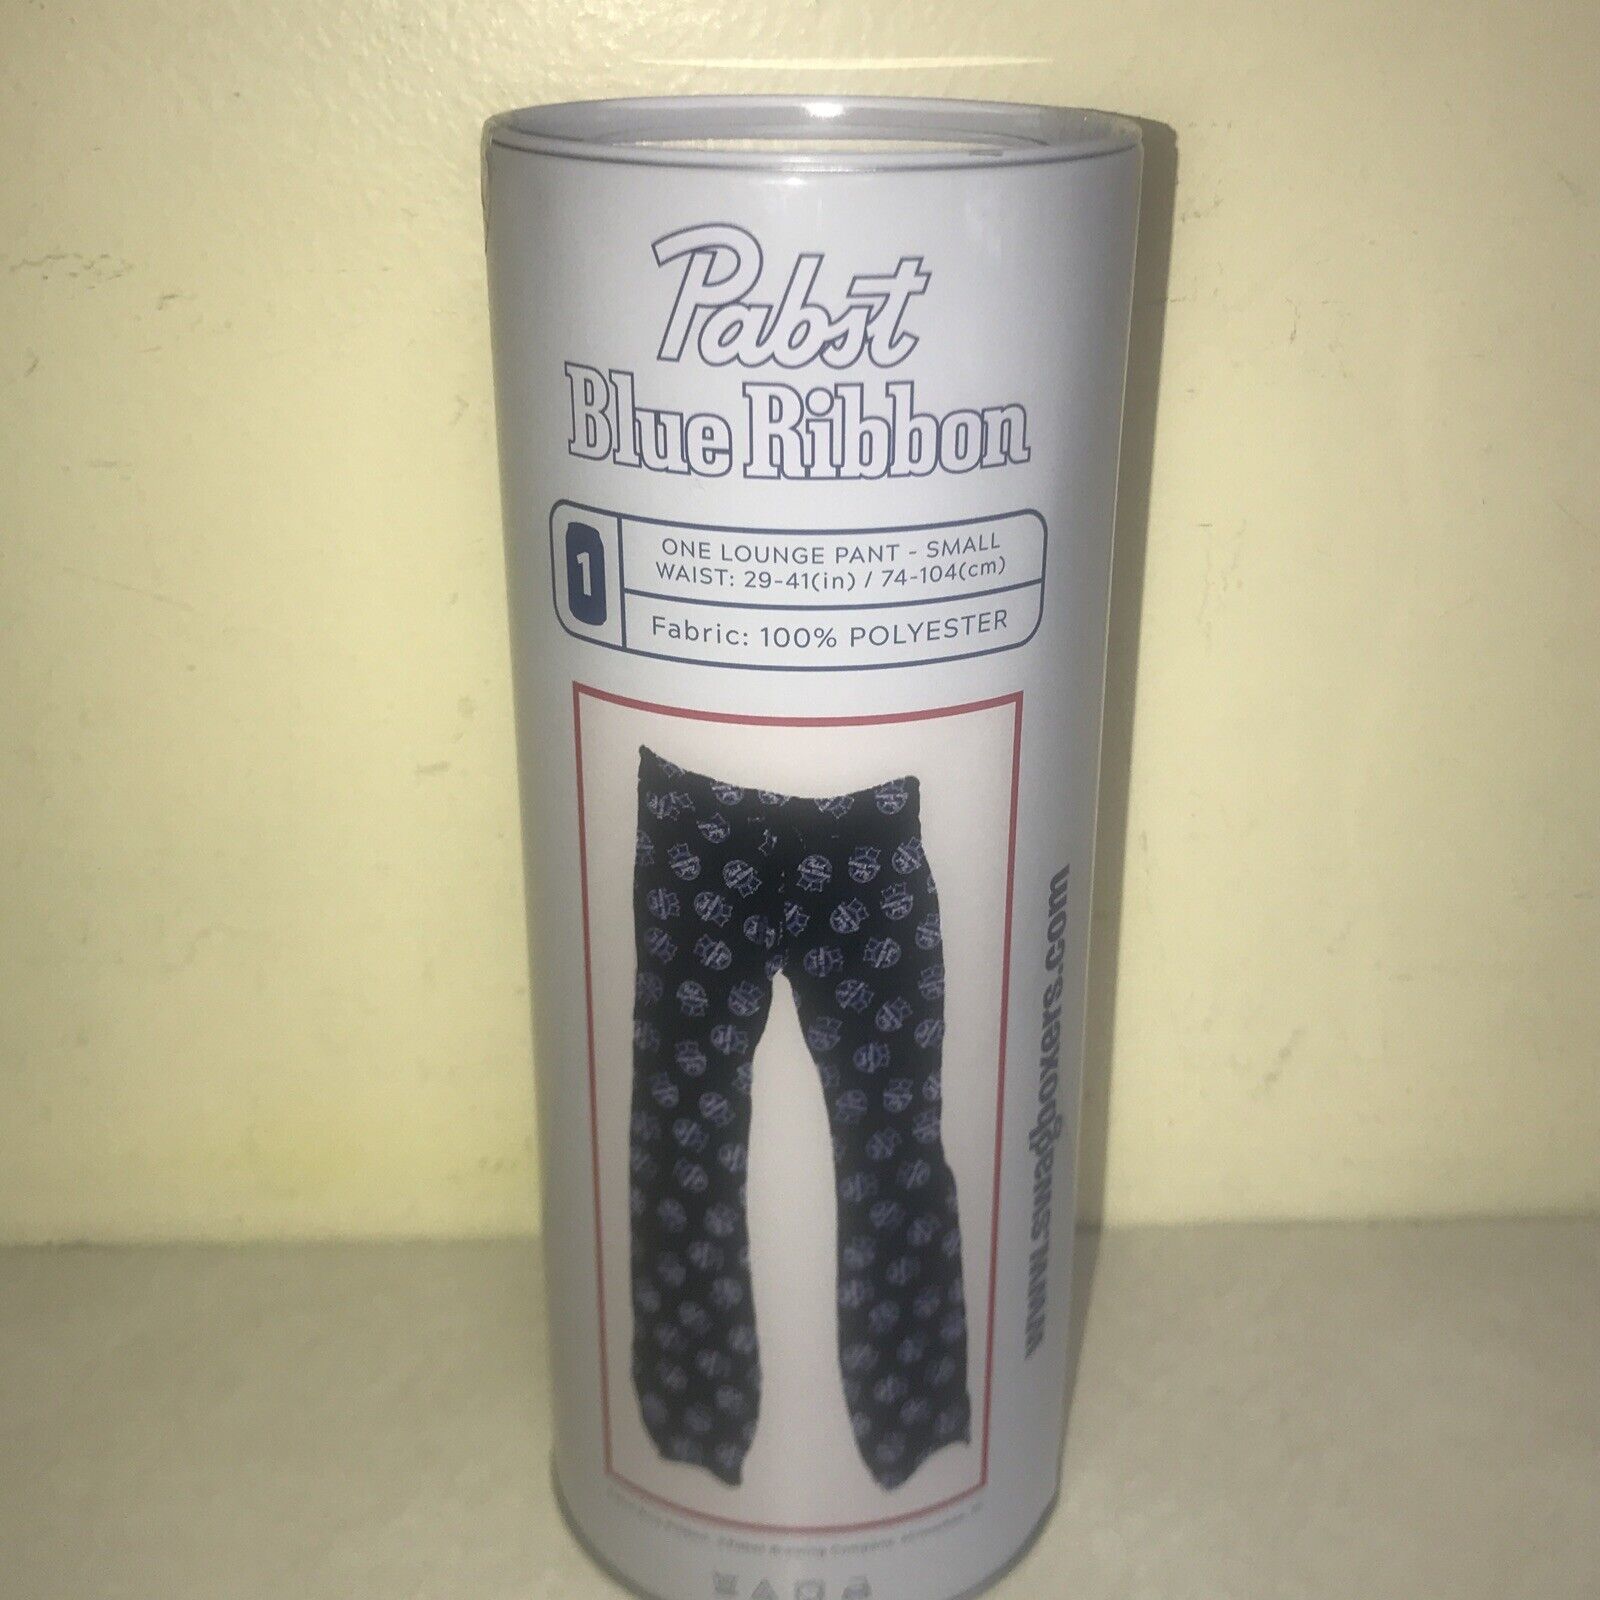 PBR Pabst Blue Ribbon Beer Lounge Pants in a can-SIZE SMALL S Swag Boxers Pabst Blue Ribbon